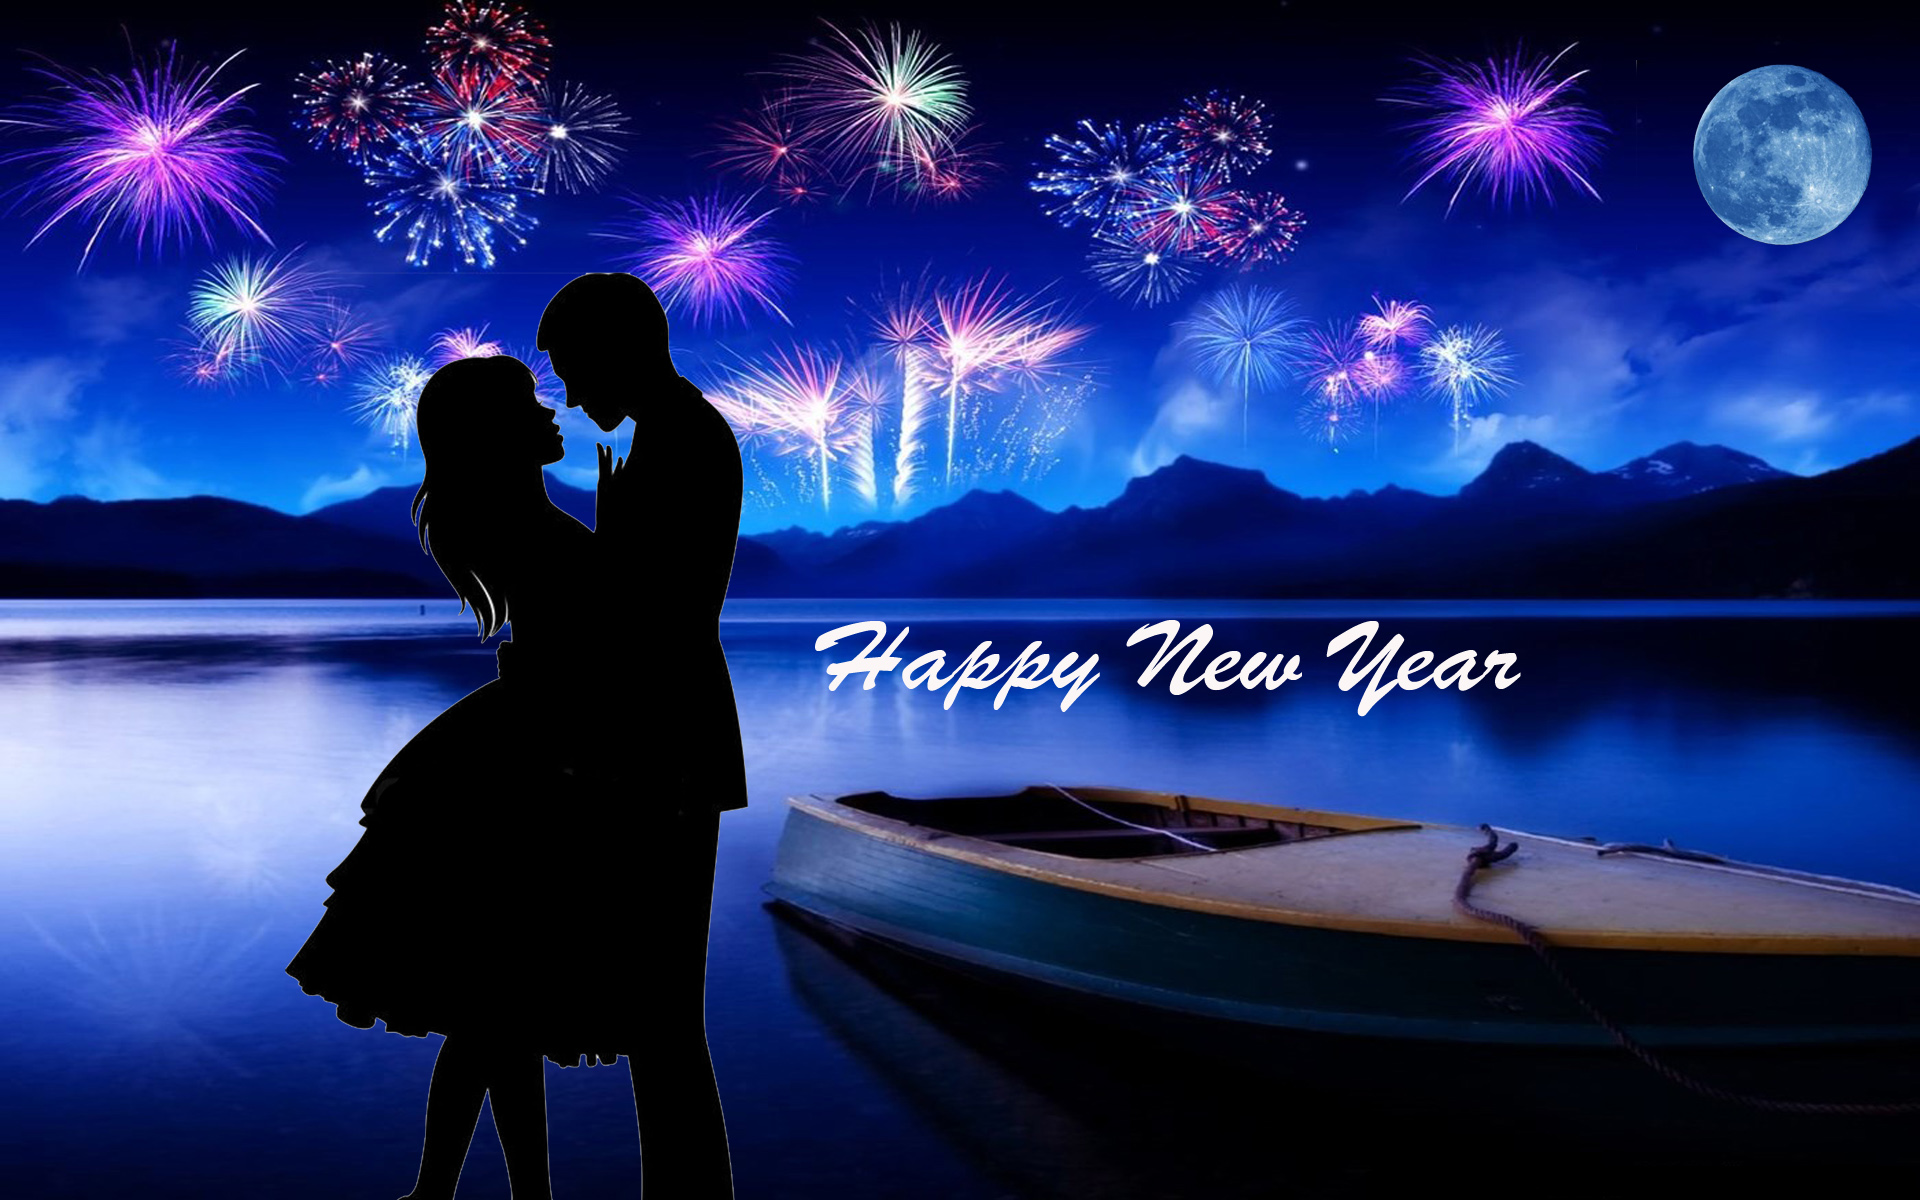 Happy New Year 2020 I Love You Greeting Cards Christmas Desktop Hd